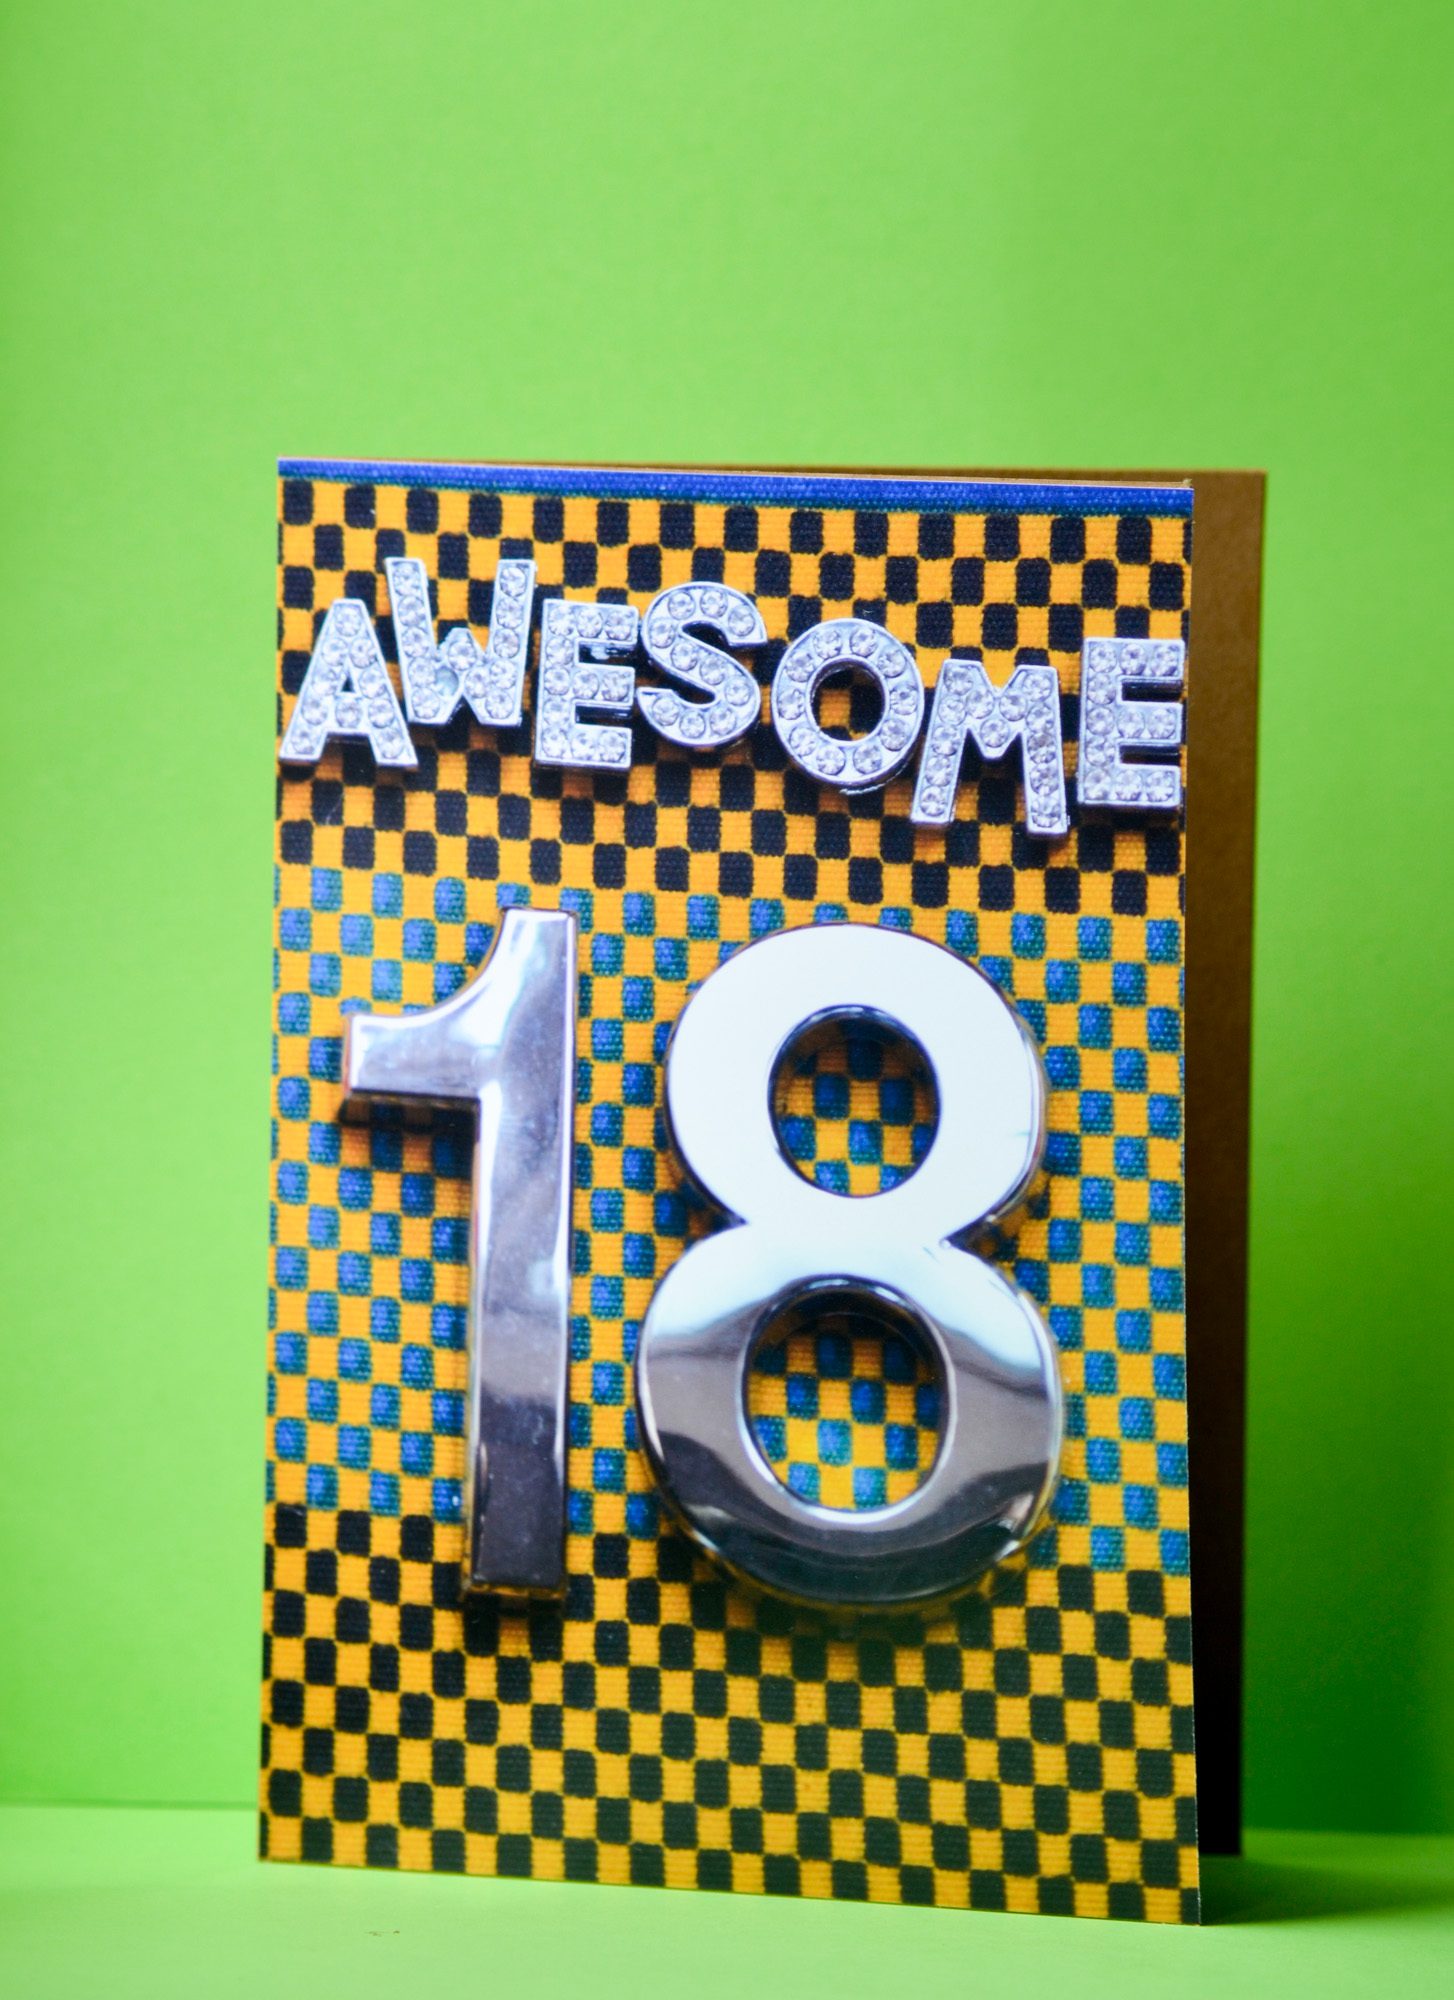 The Awesome 18th Birthday card